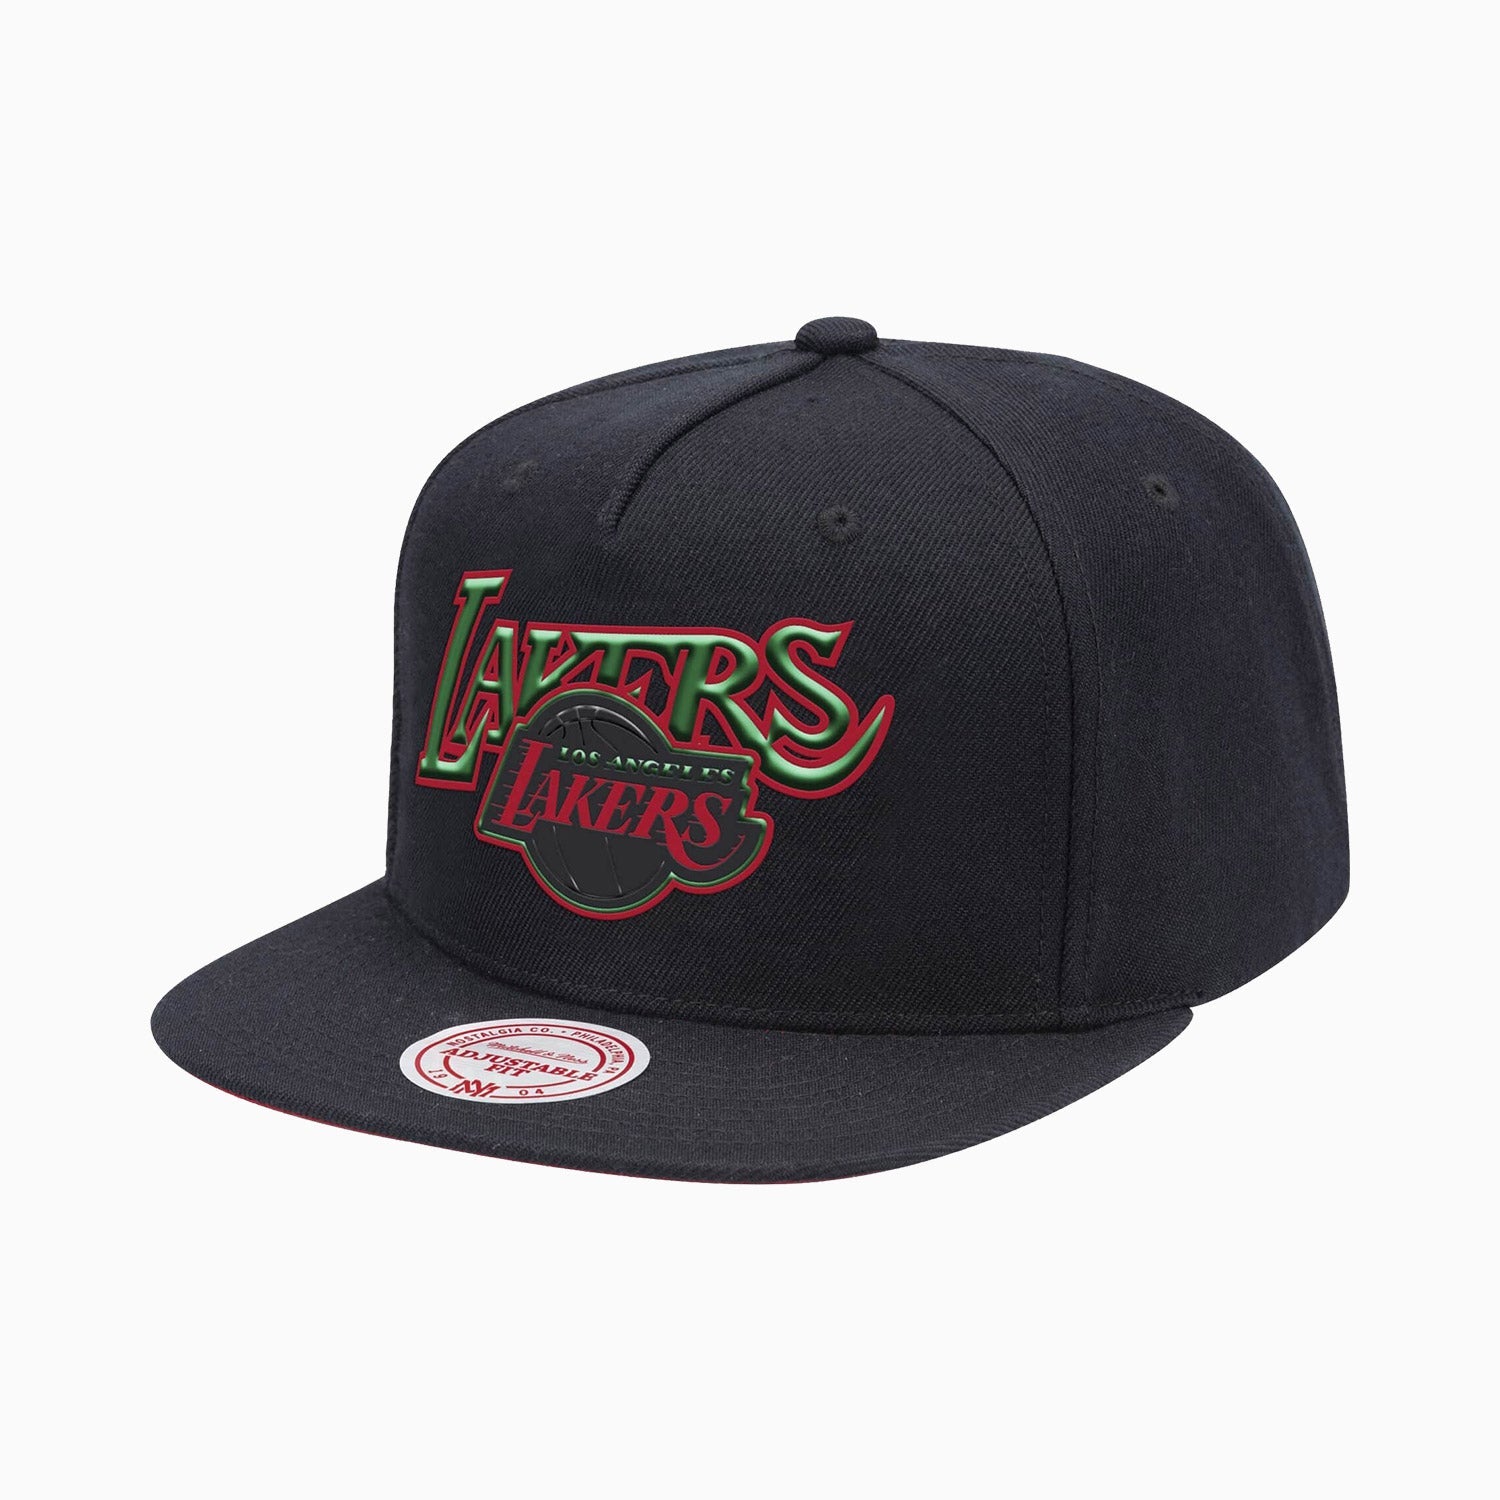 mitchell-and-ness-los-angeles-lakers-spirit-nba-snapback-hat-bh7af3-lal-k-nj2